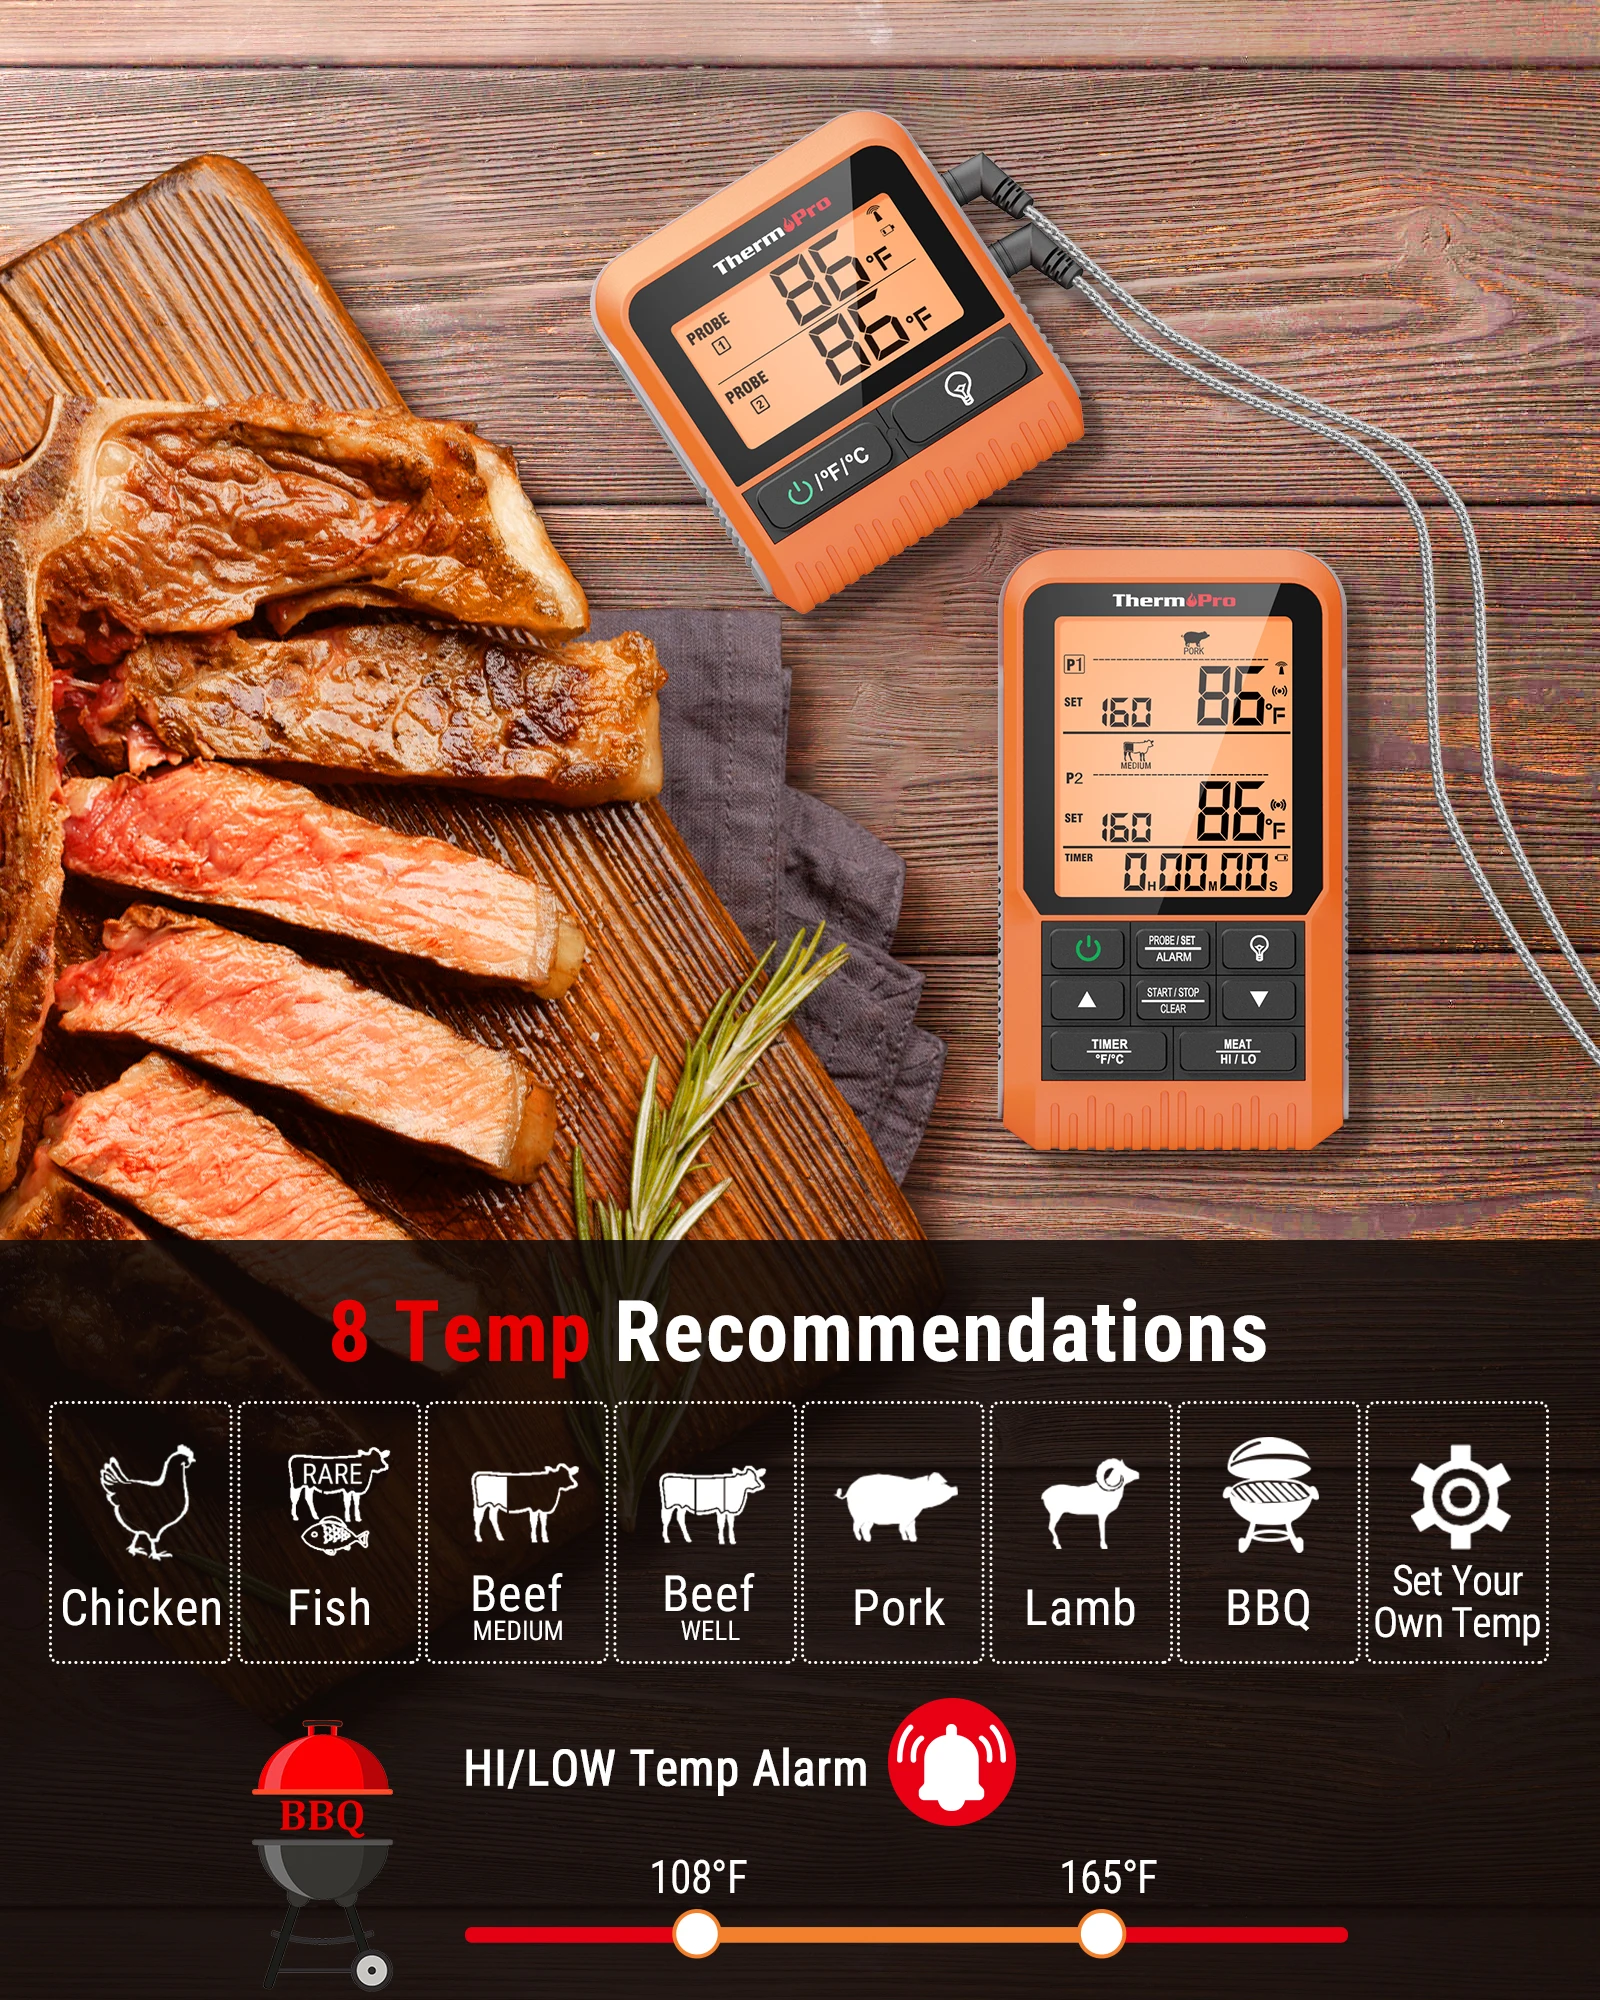 https://ae01.alicdn.com/kf/S5d21a0021deb4a4b9bf1633b3011c4c2C/ThermoPro-TP826B-150M-Wireless-Dual-Probes-Backlight-Kitchen-Cooking-Meat-Thermometer-With-Timer-For-Barbecue-Grill.jpg